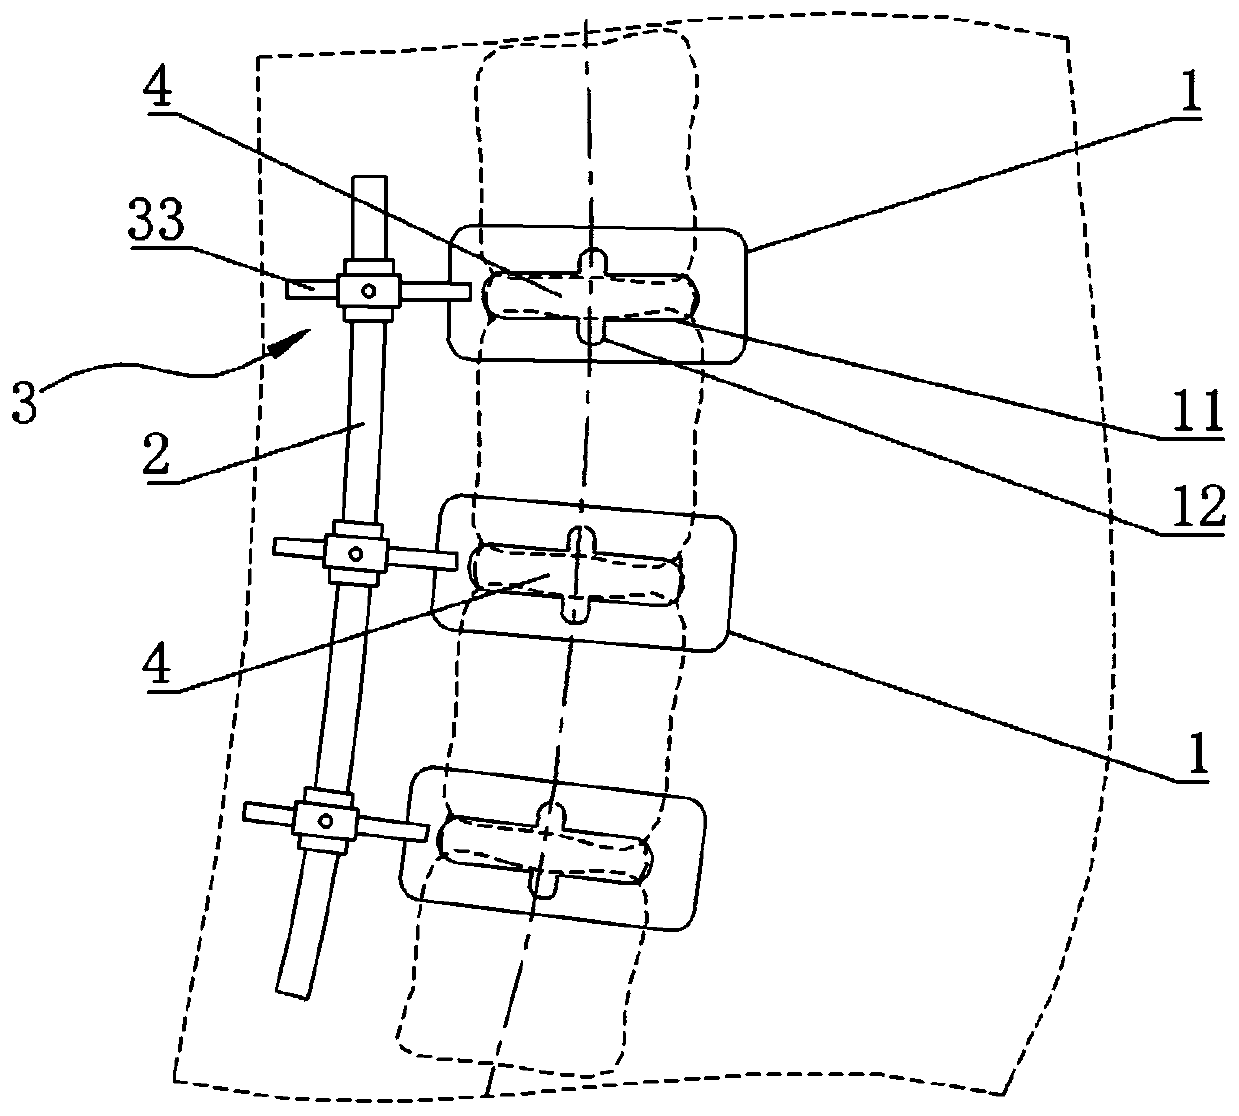 Intervertebral disc surgical incision positioning device